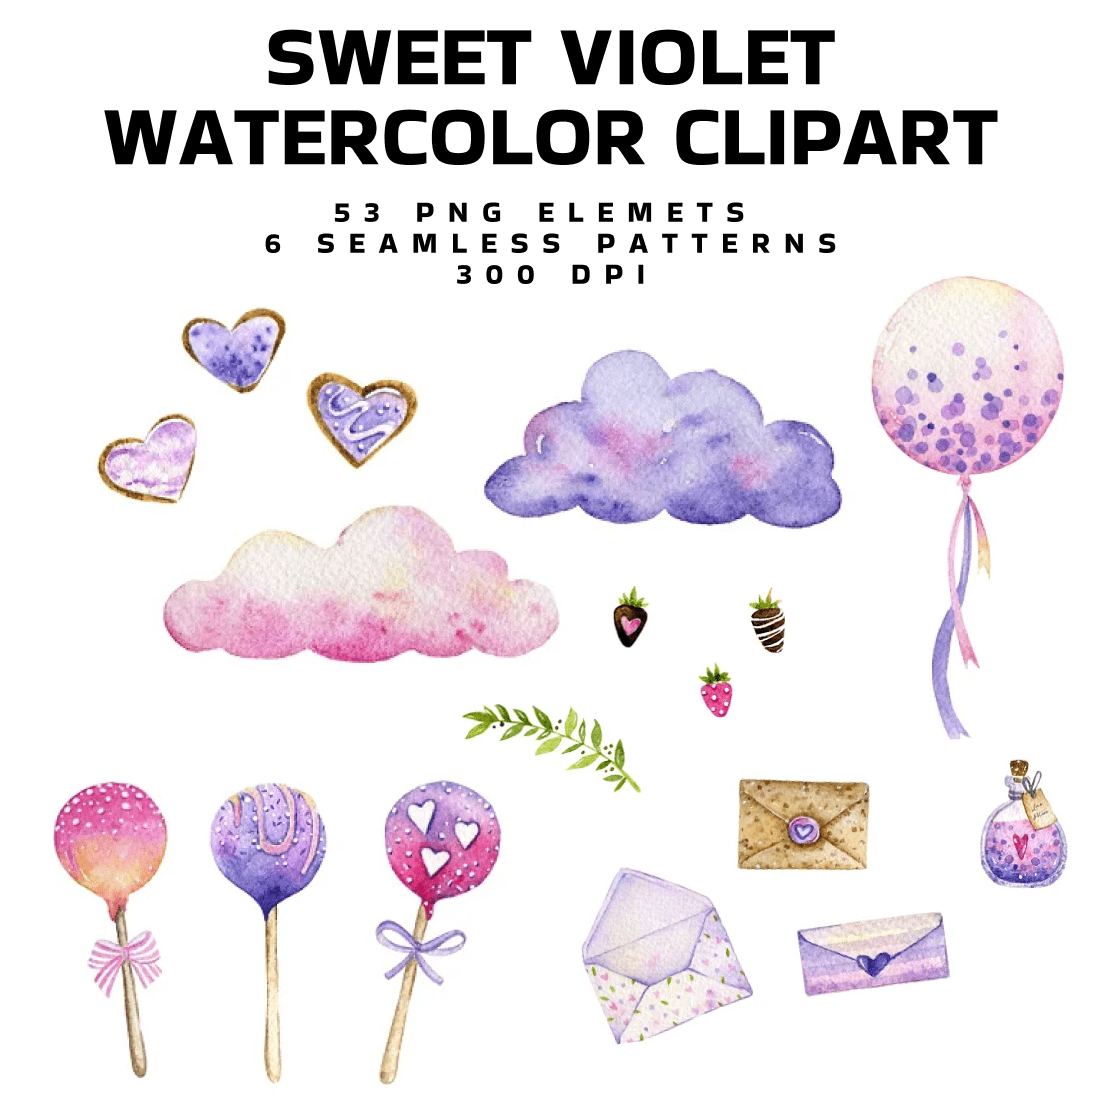 Sweet Violet Watercolor Clipart - main image preview.